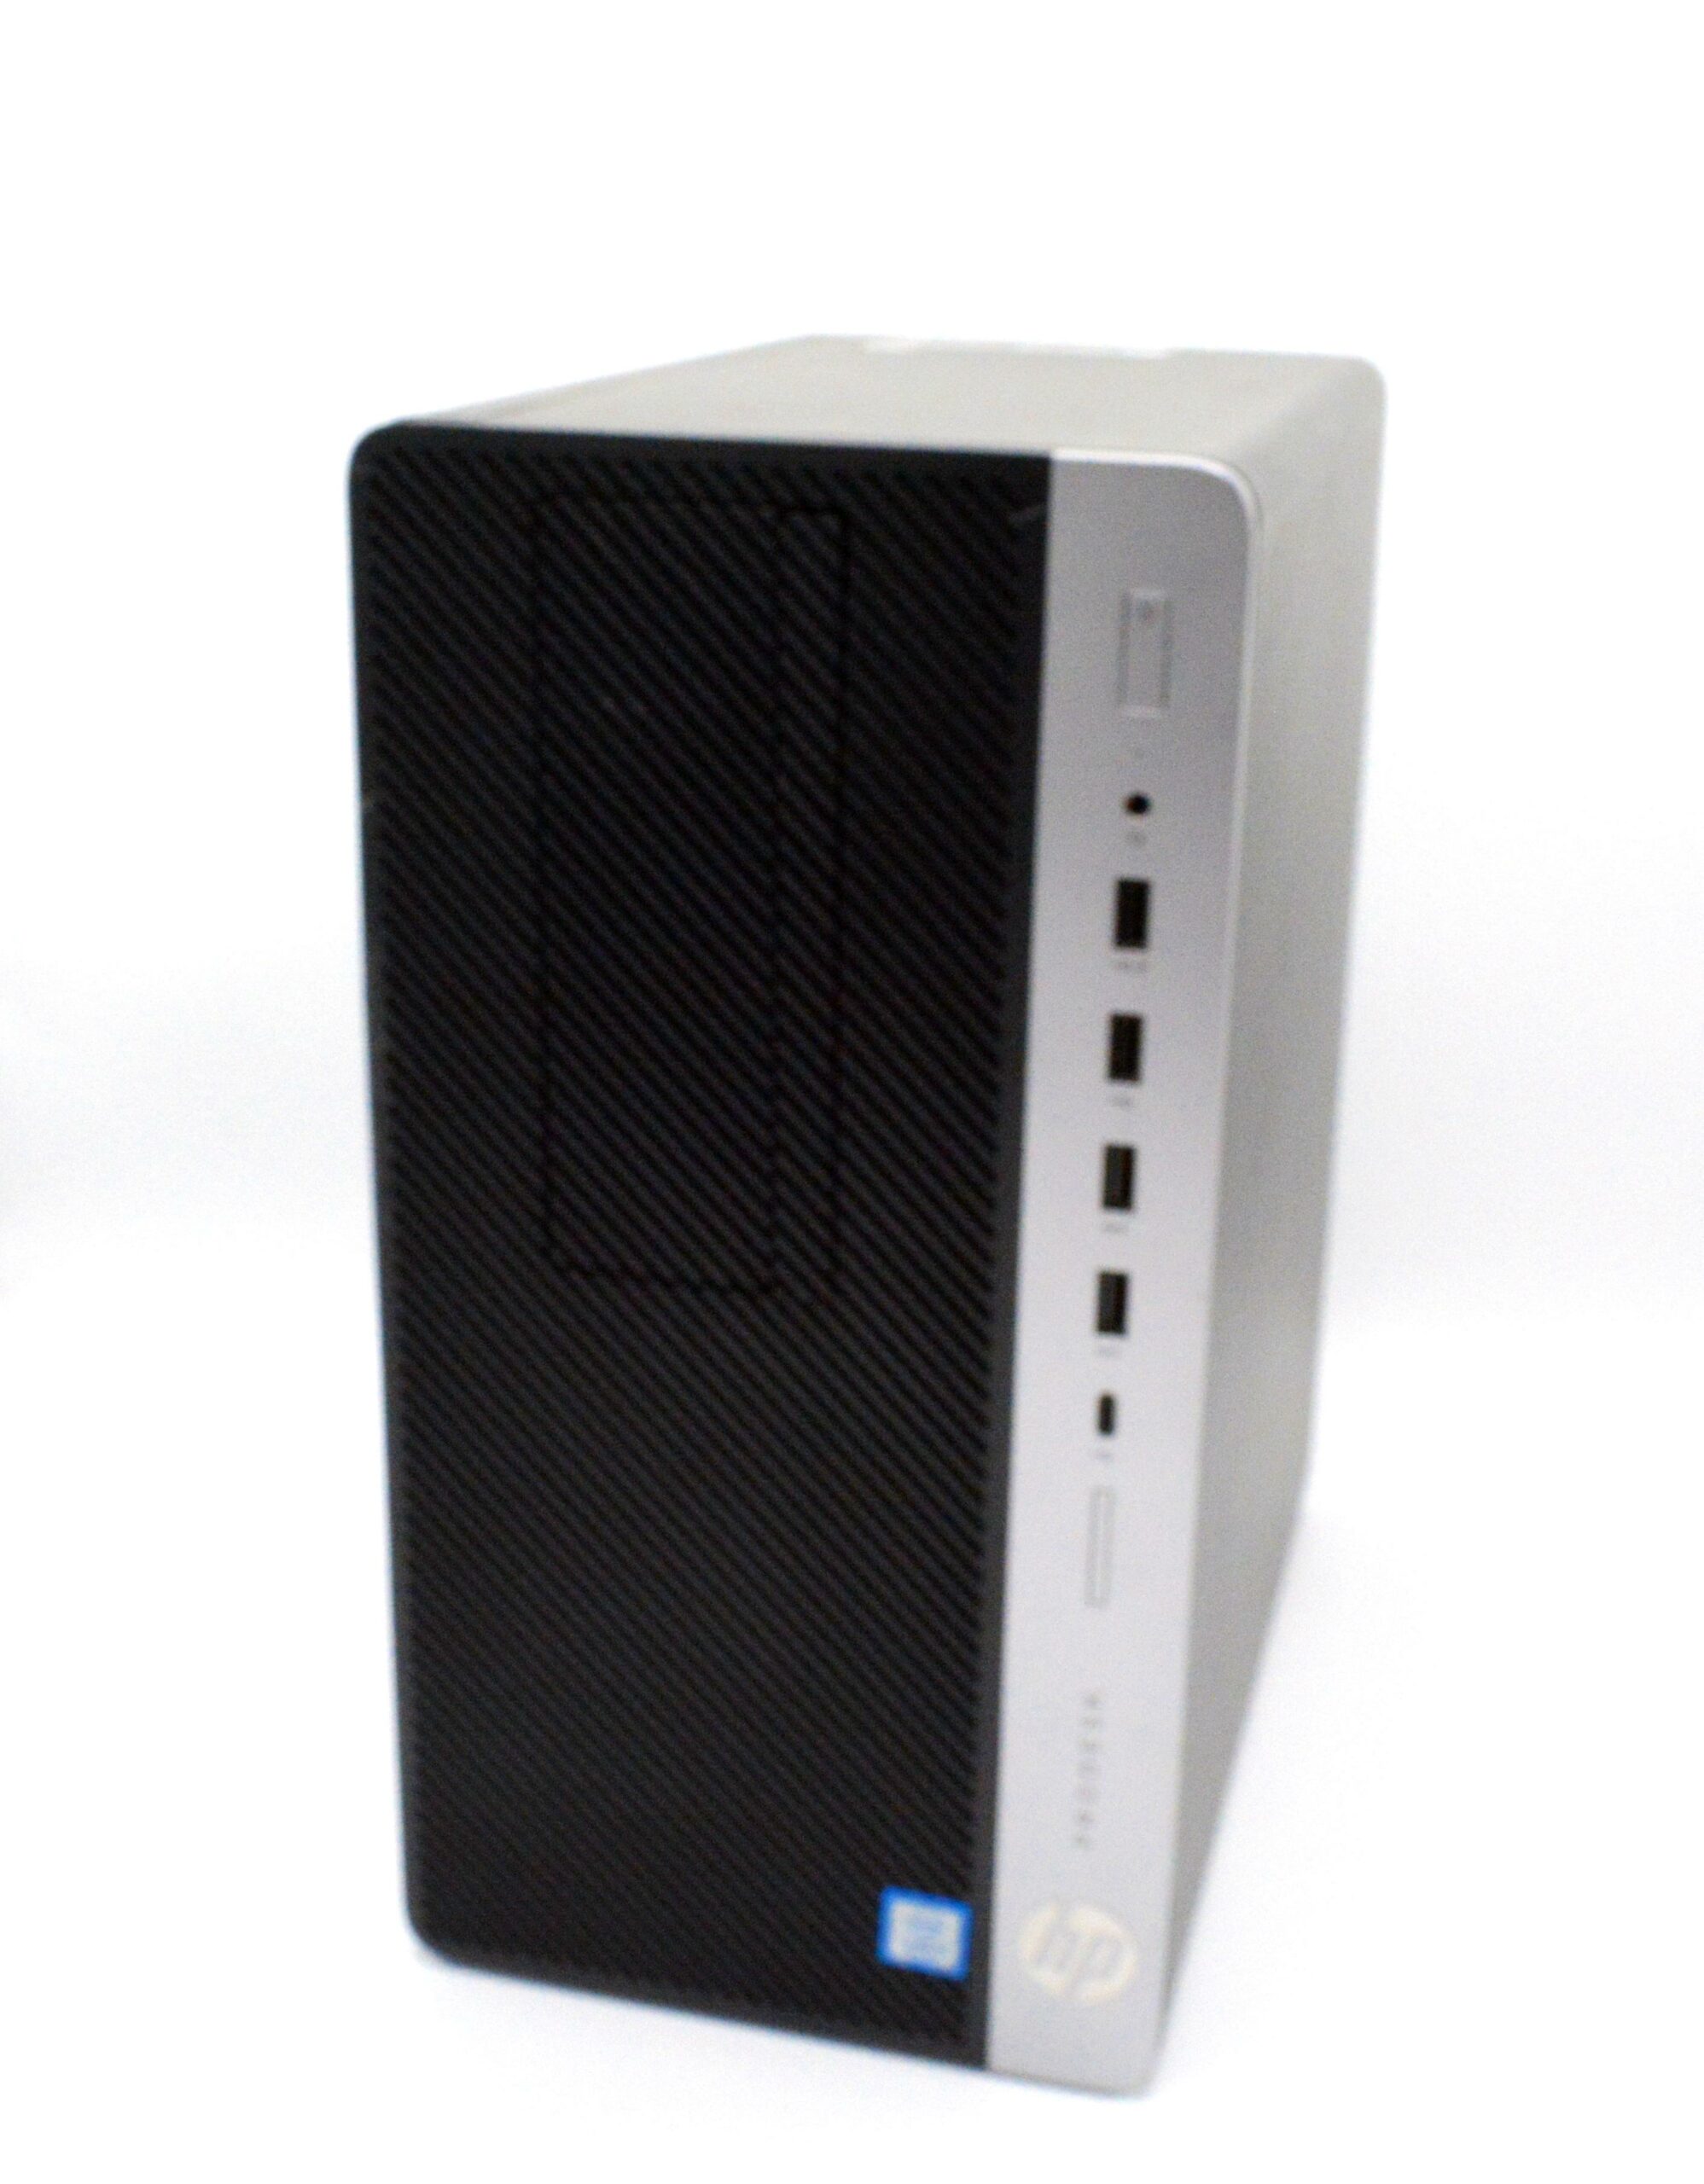 ProDesk 600 G4 Microtower PC (with PCI slot)